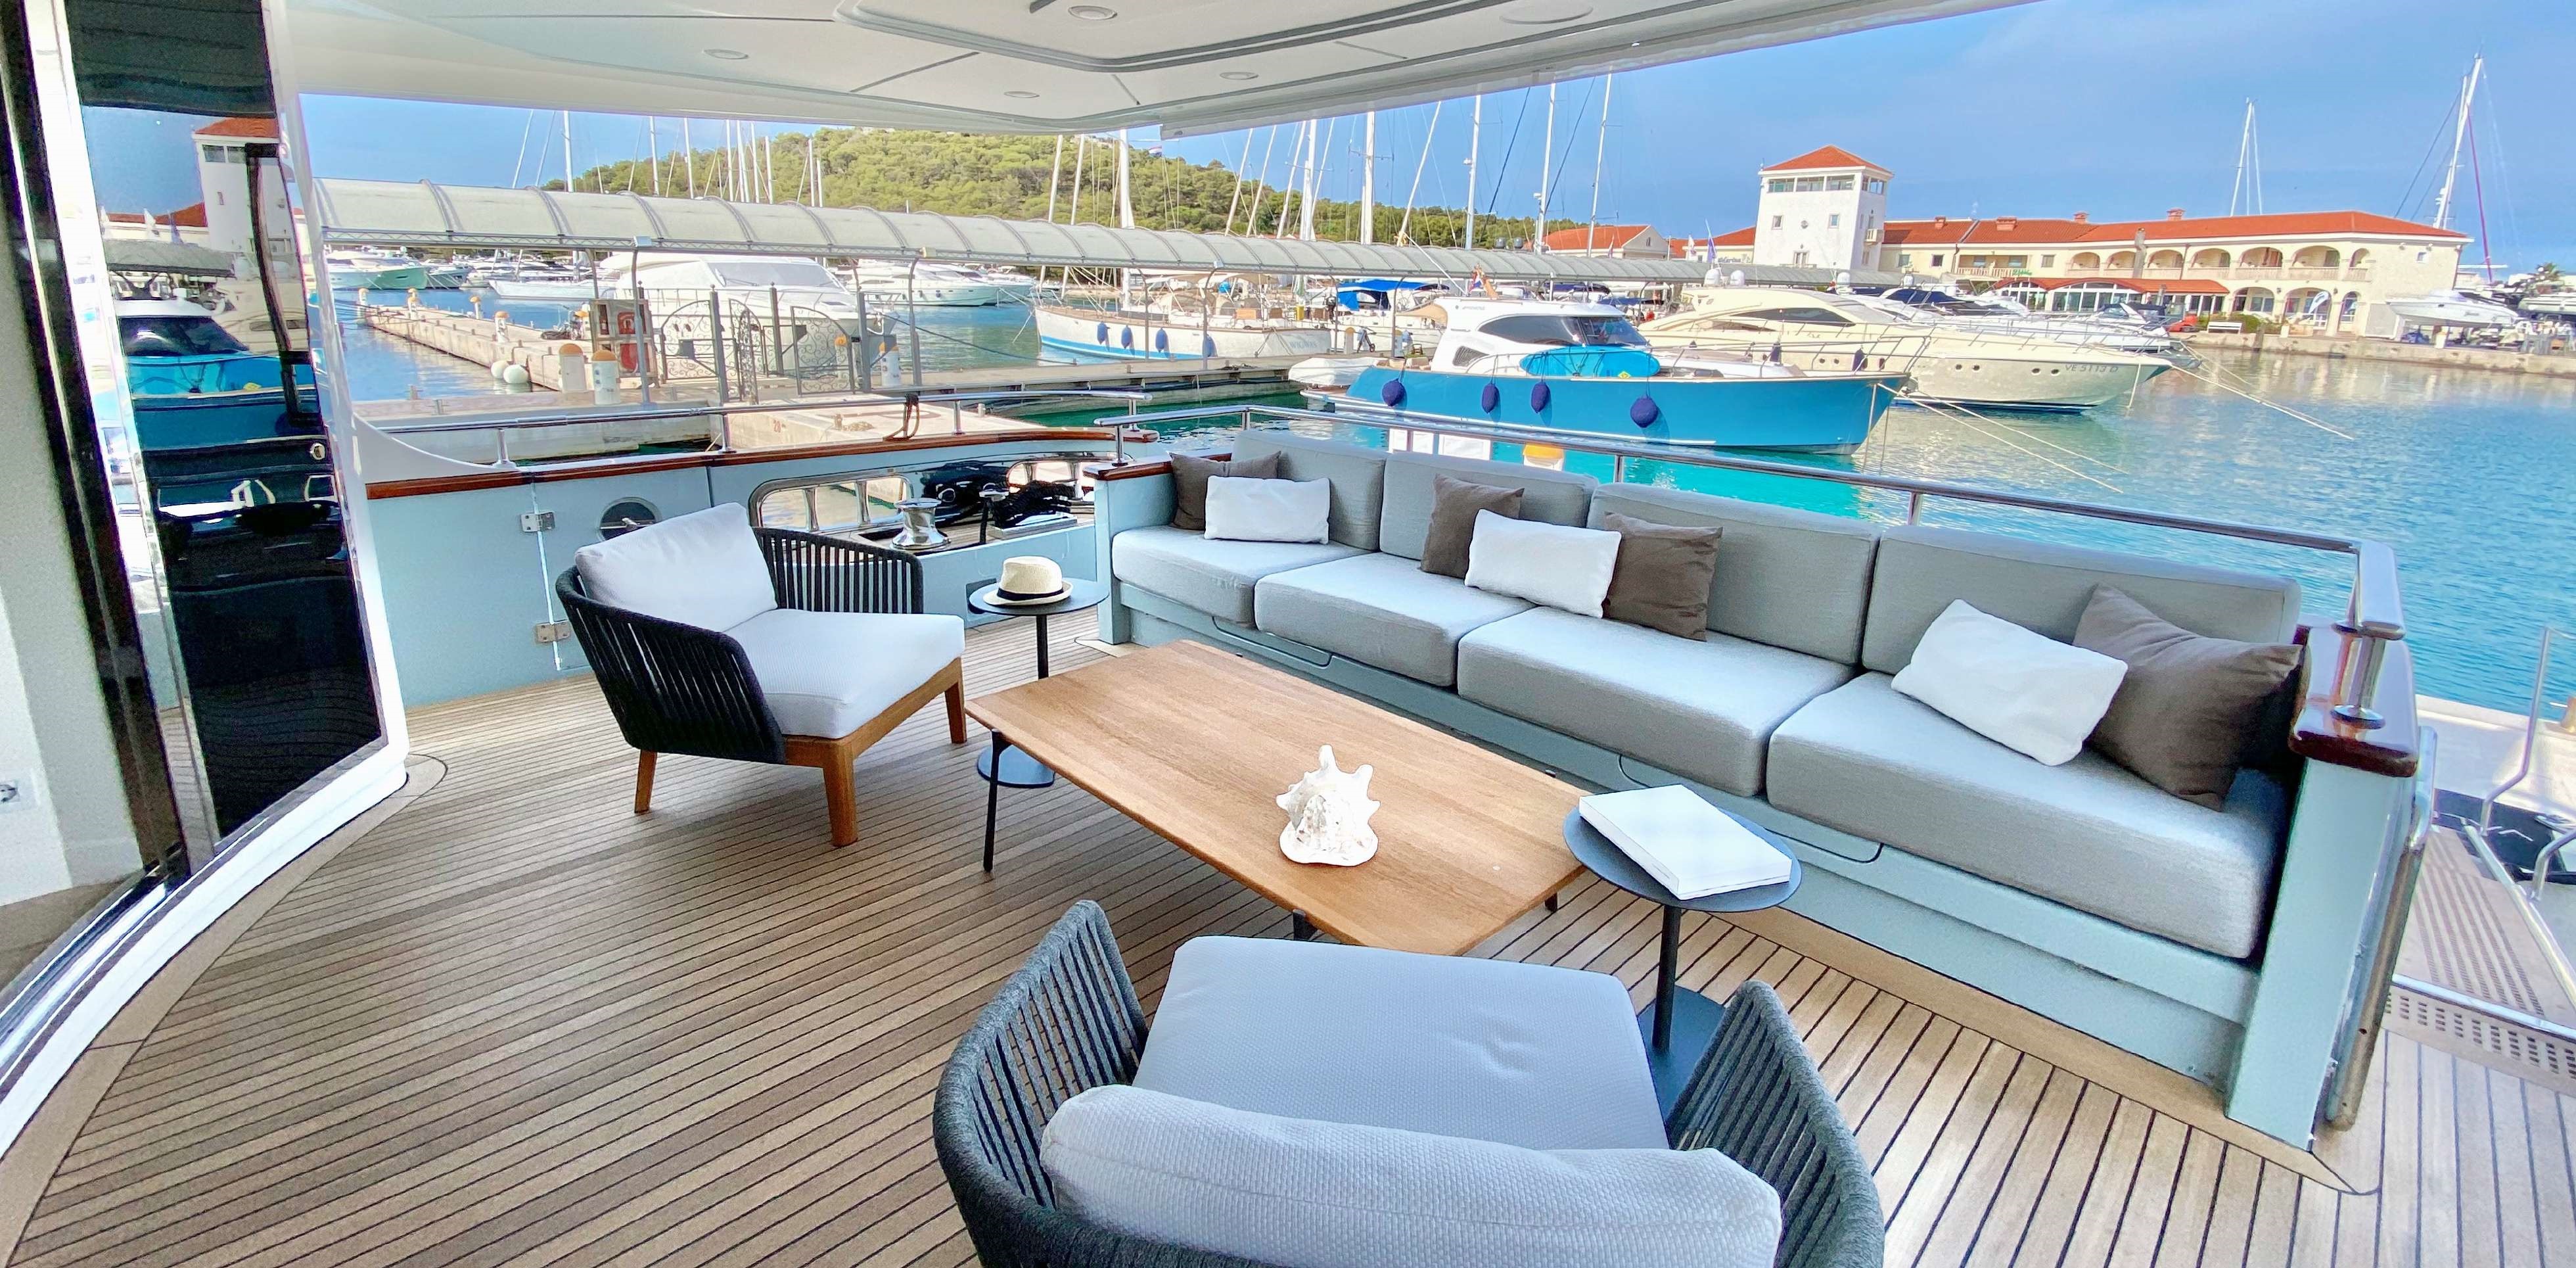 Neutral furnishing on the aft deck